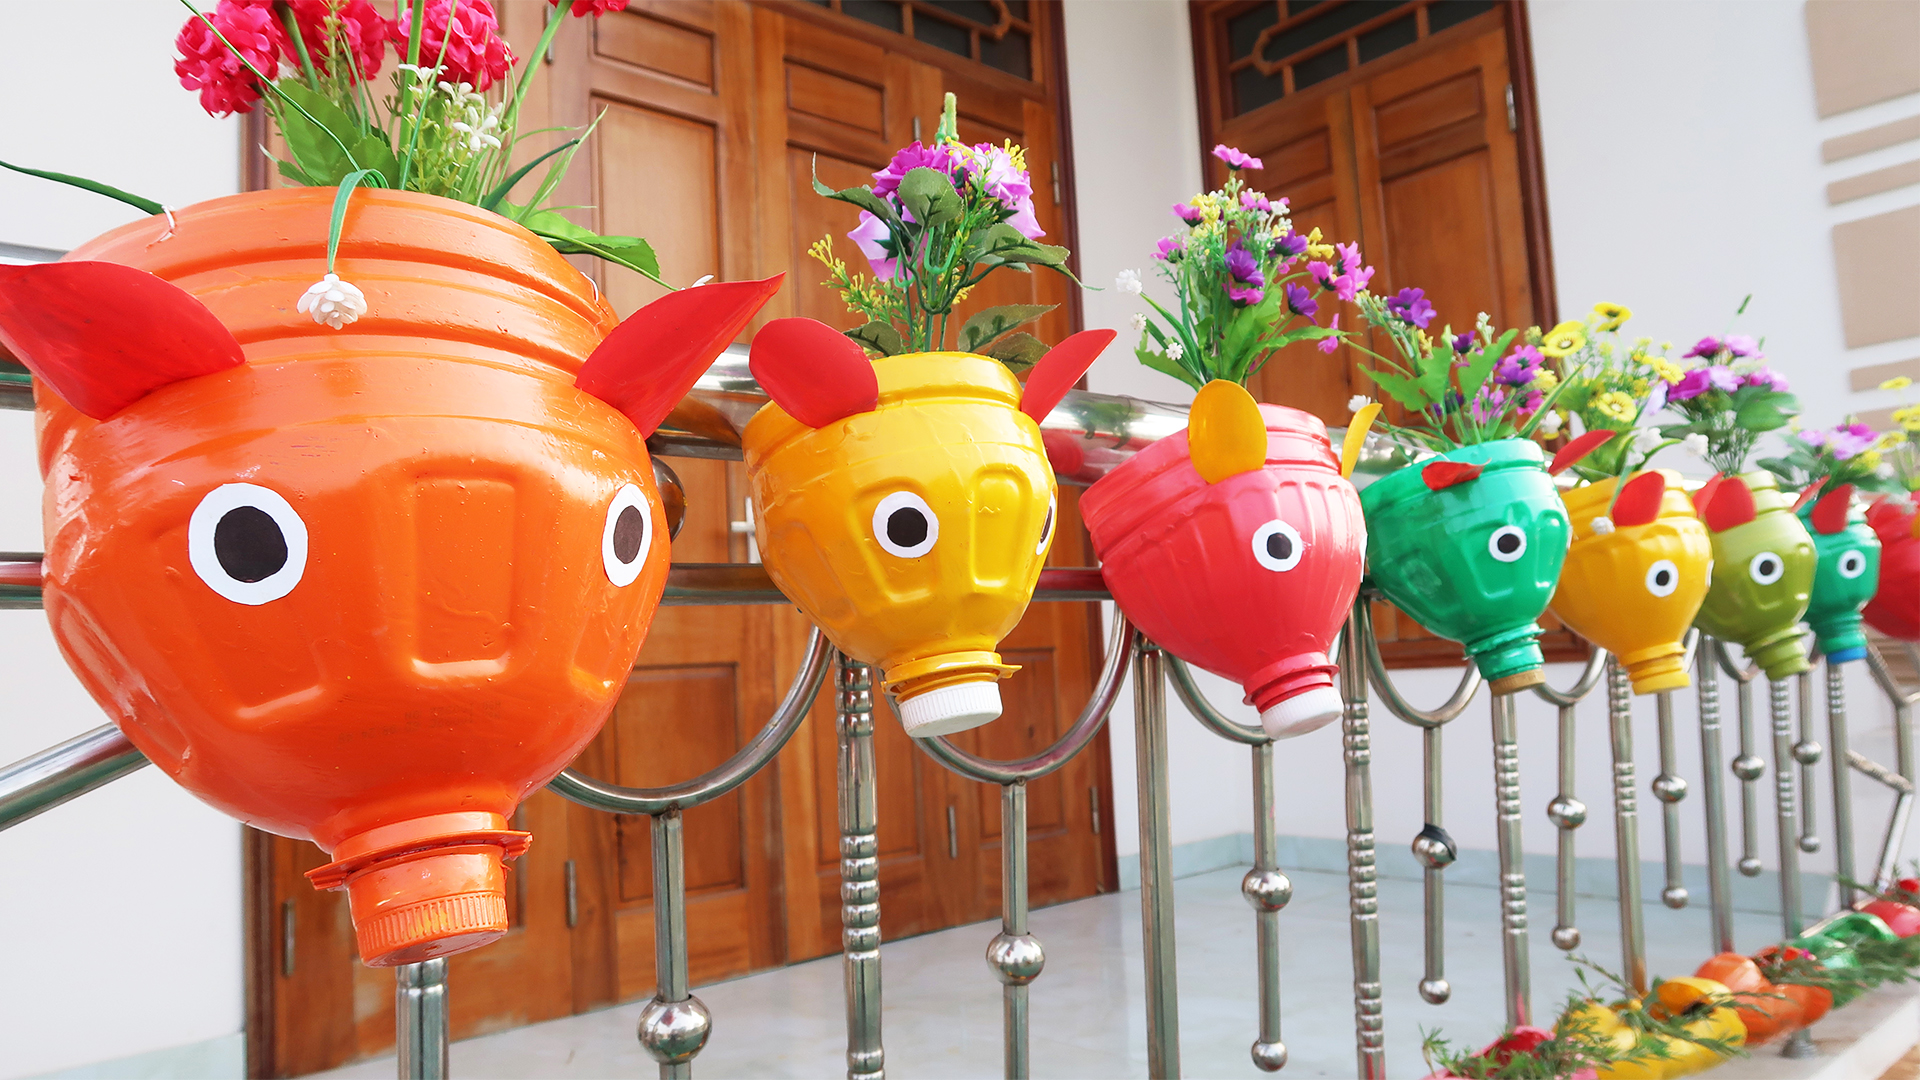 The Idea Of Recycling Plastic Bottles To Make Beautiful Pig Face-Shaped Flower Pots